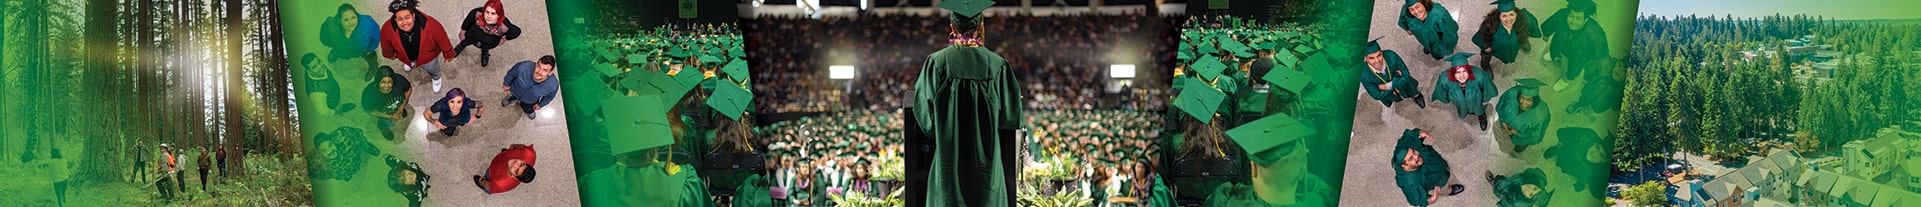 A Green River College student speaking at a commencement ceremony.